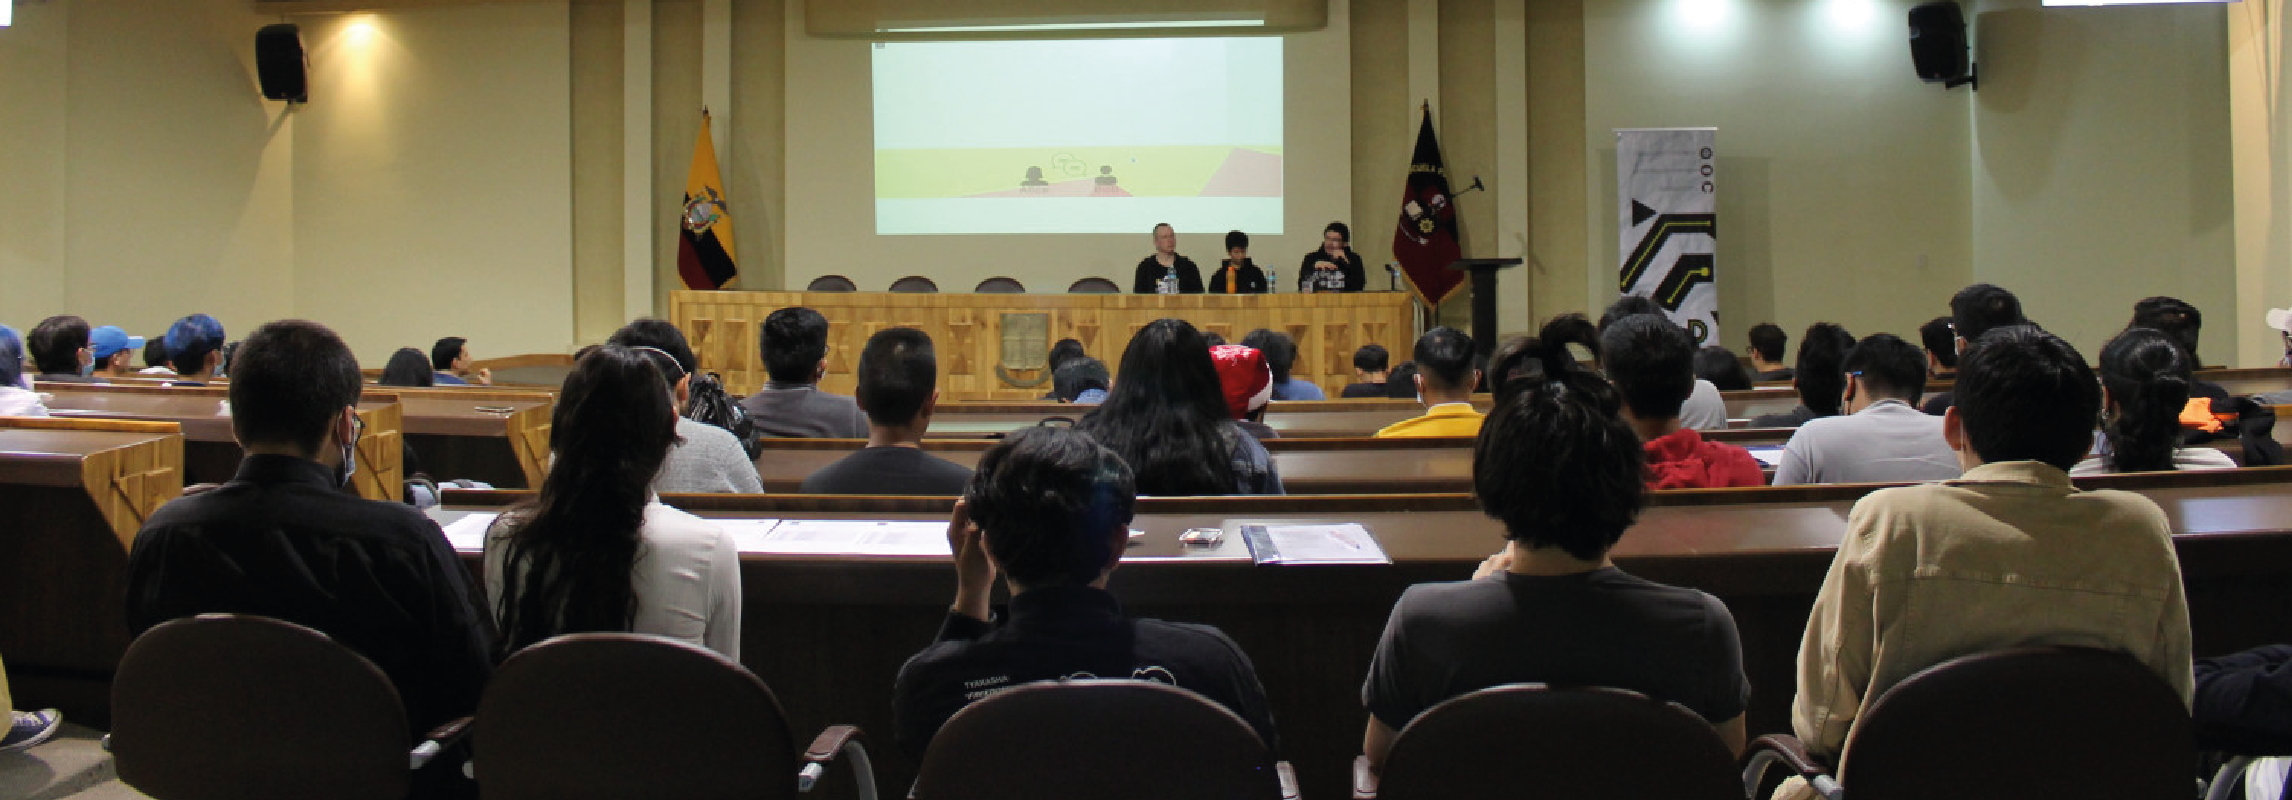 CAD gave a presentation at the Faculty of Computer Science of the National Polytechnic School (Escuela Politécnica Nacional - EPN)